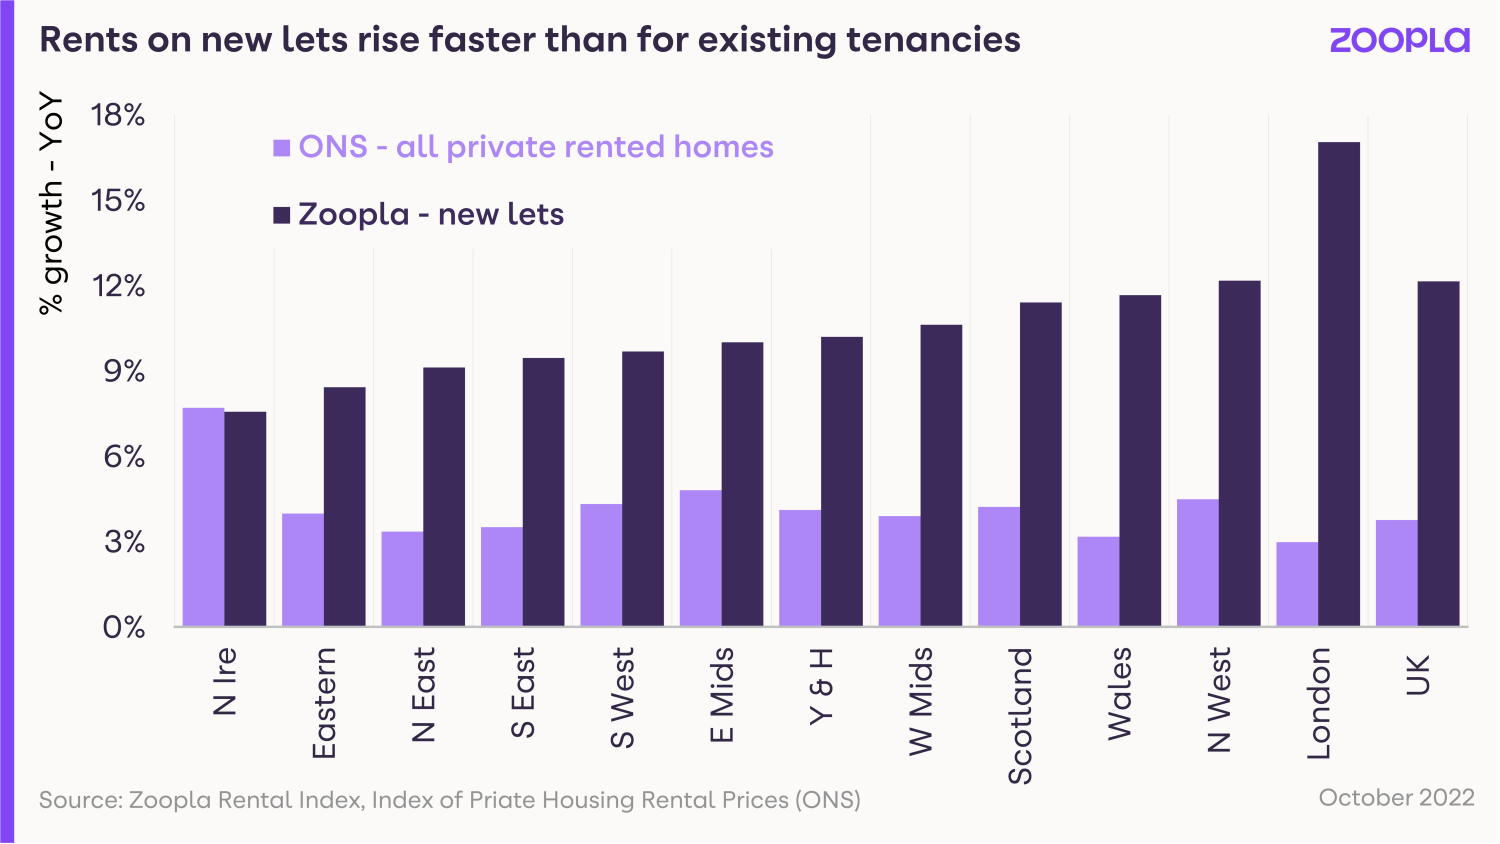 Rental market report December 2022 - rents on new lets rising faster than tenancies